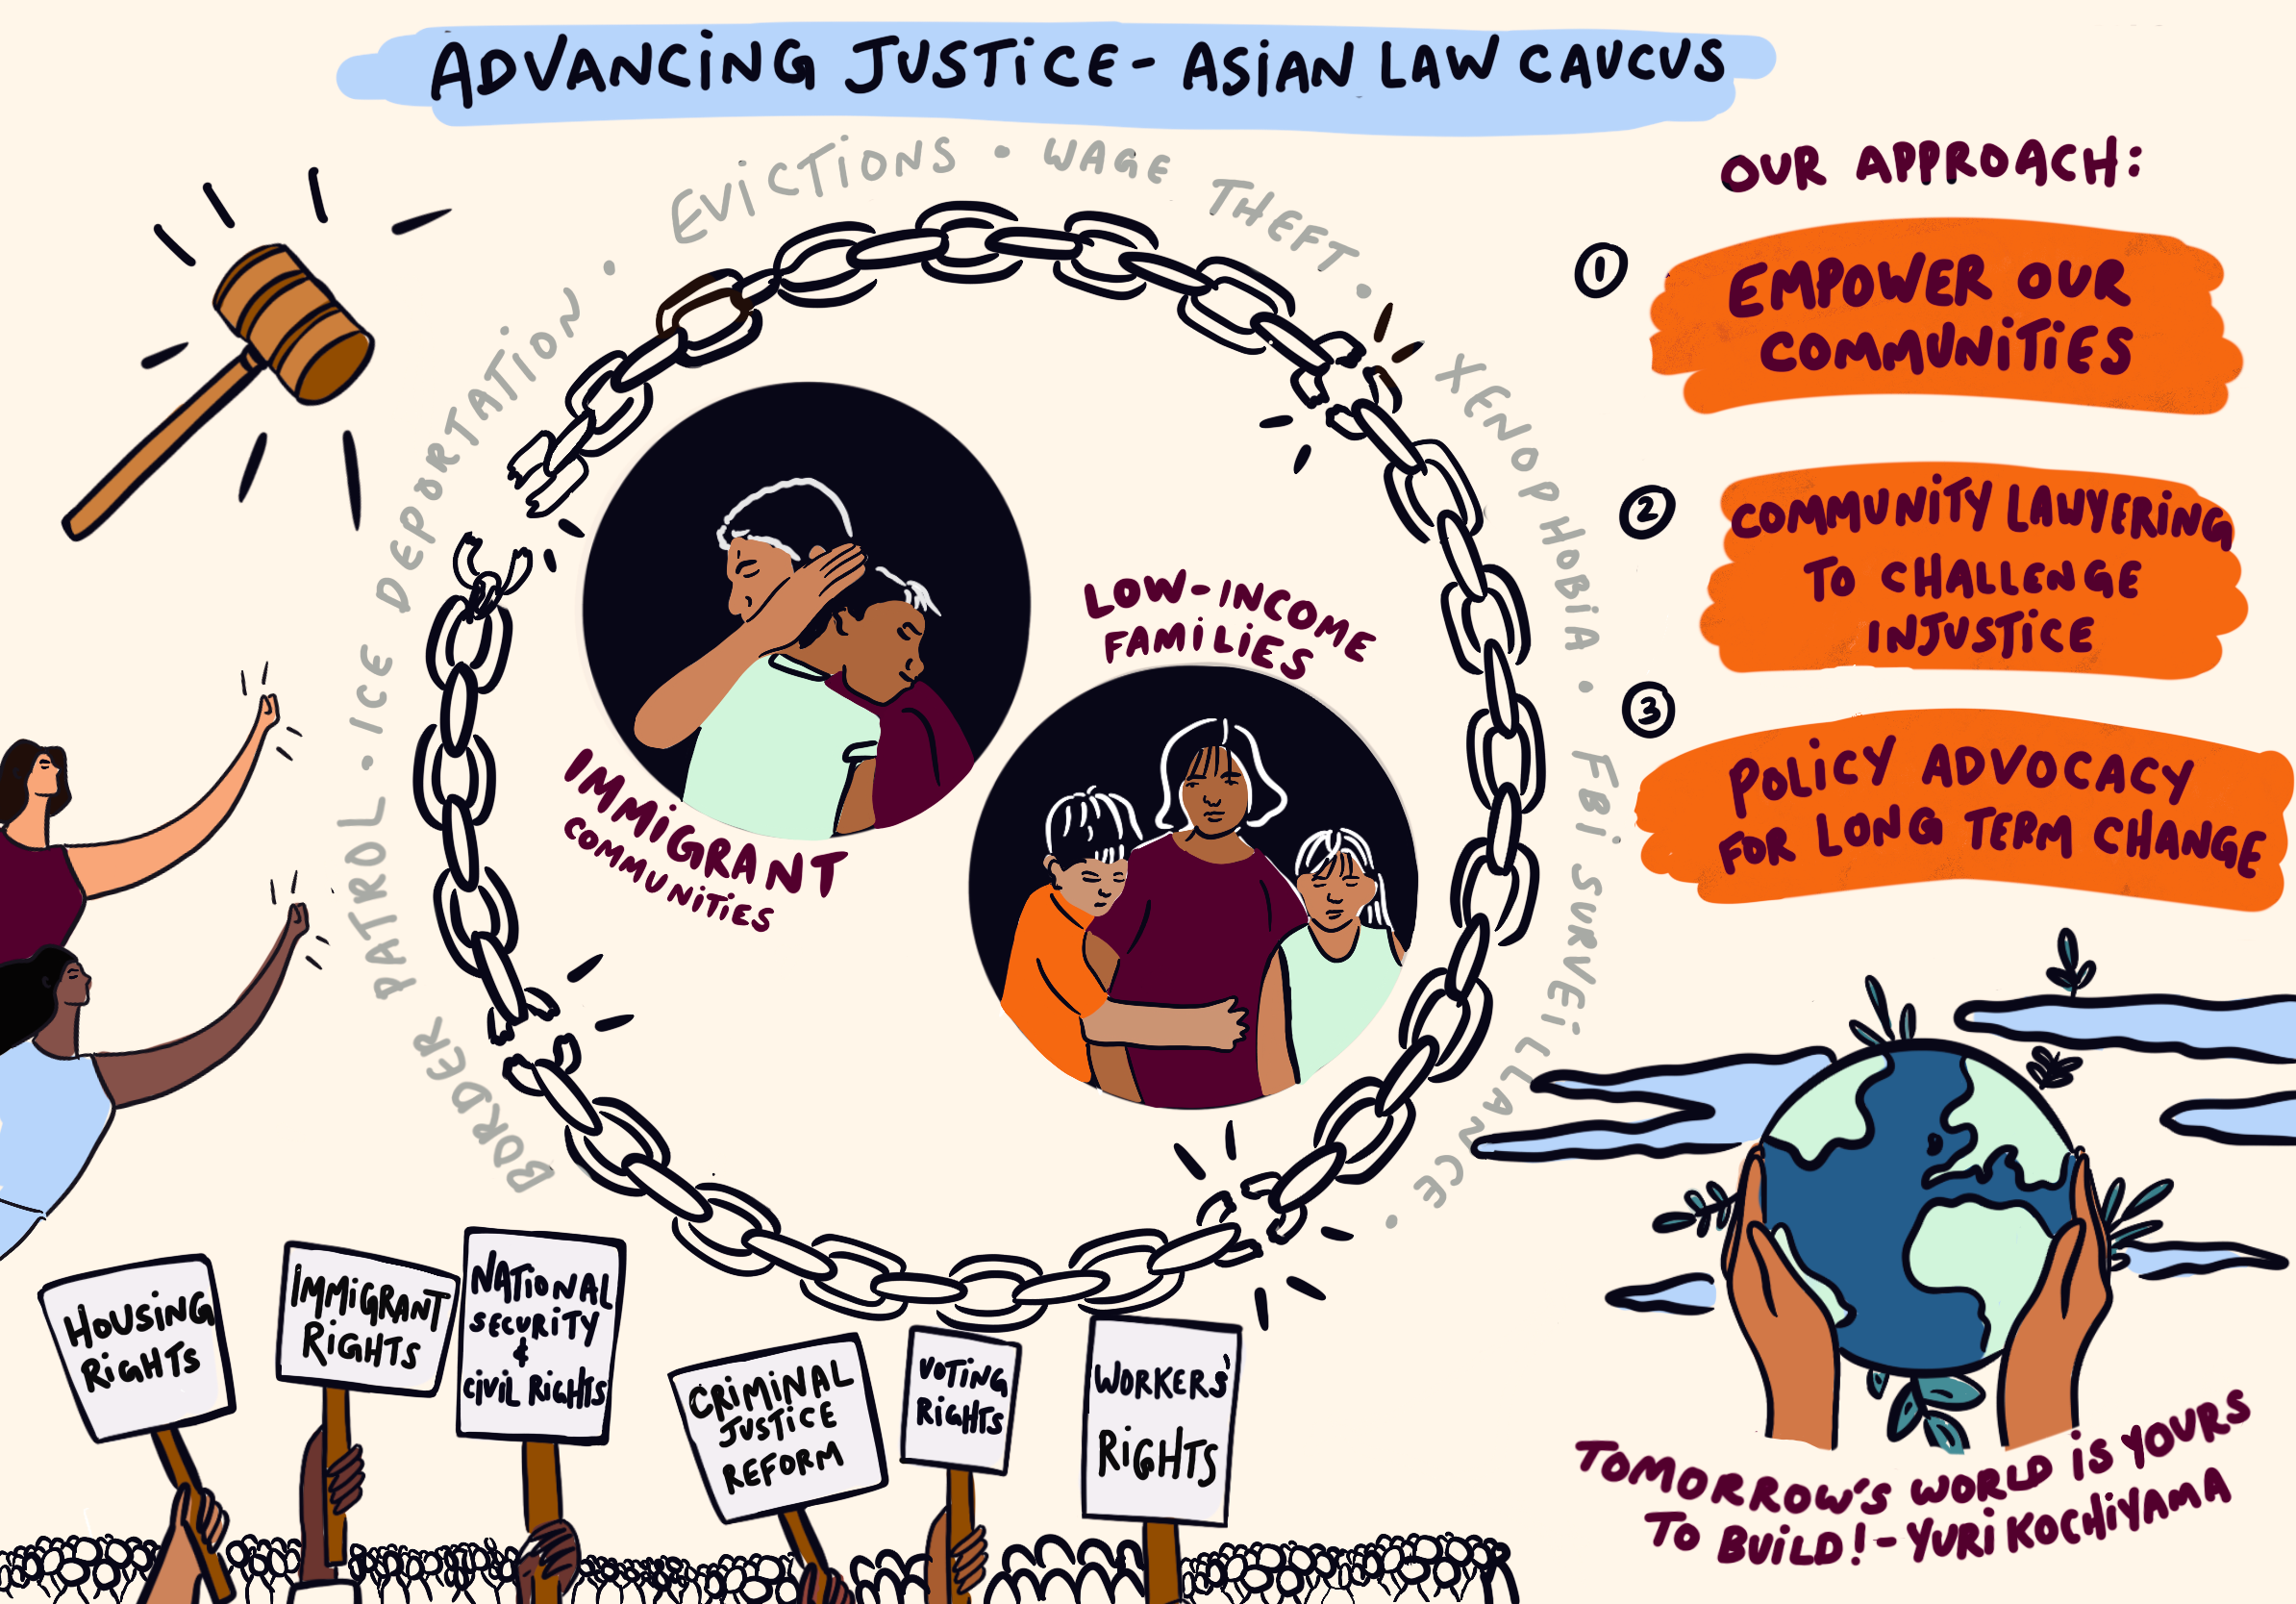 Illustration highlights the 3 pronged approach of ALC, the organization's 6 program areas, and features the clients we serve, often those impacted by several systemic issues--immigrant communities and low income families. The illustration includes quote by Yuri Kochiyama, "tomorrow is ours to build."